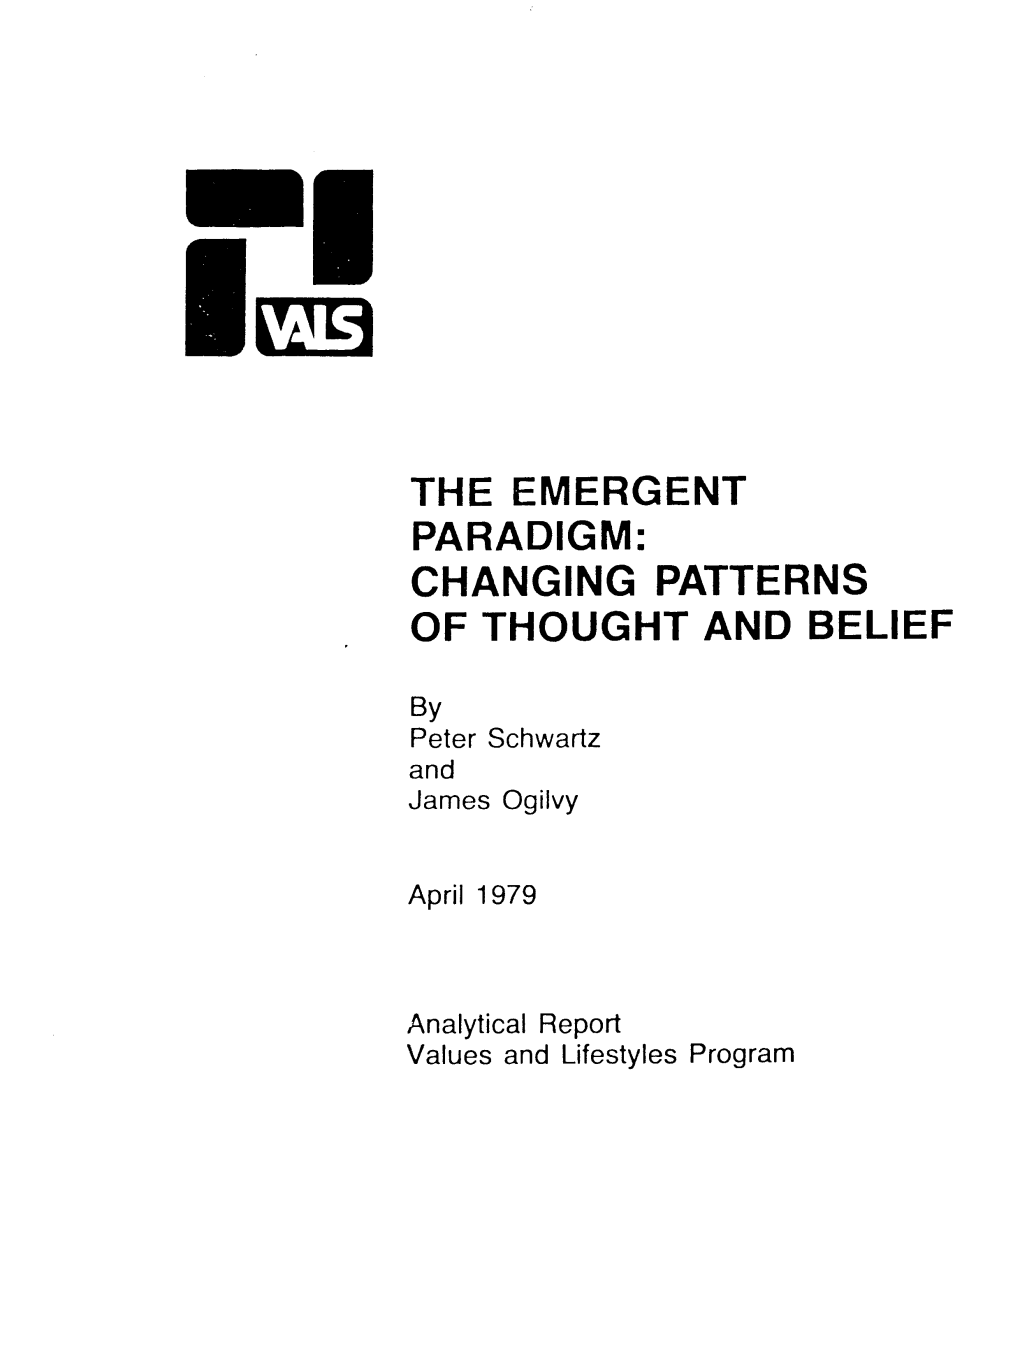 The Emergen] Paradigm: Changing Patterns of Thought and Belief